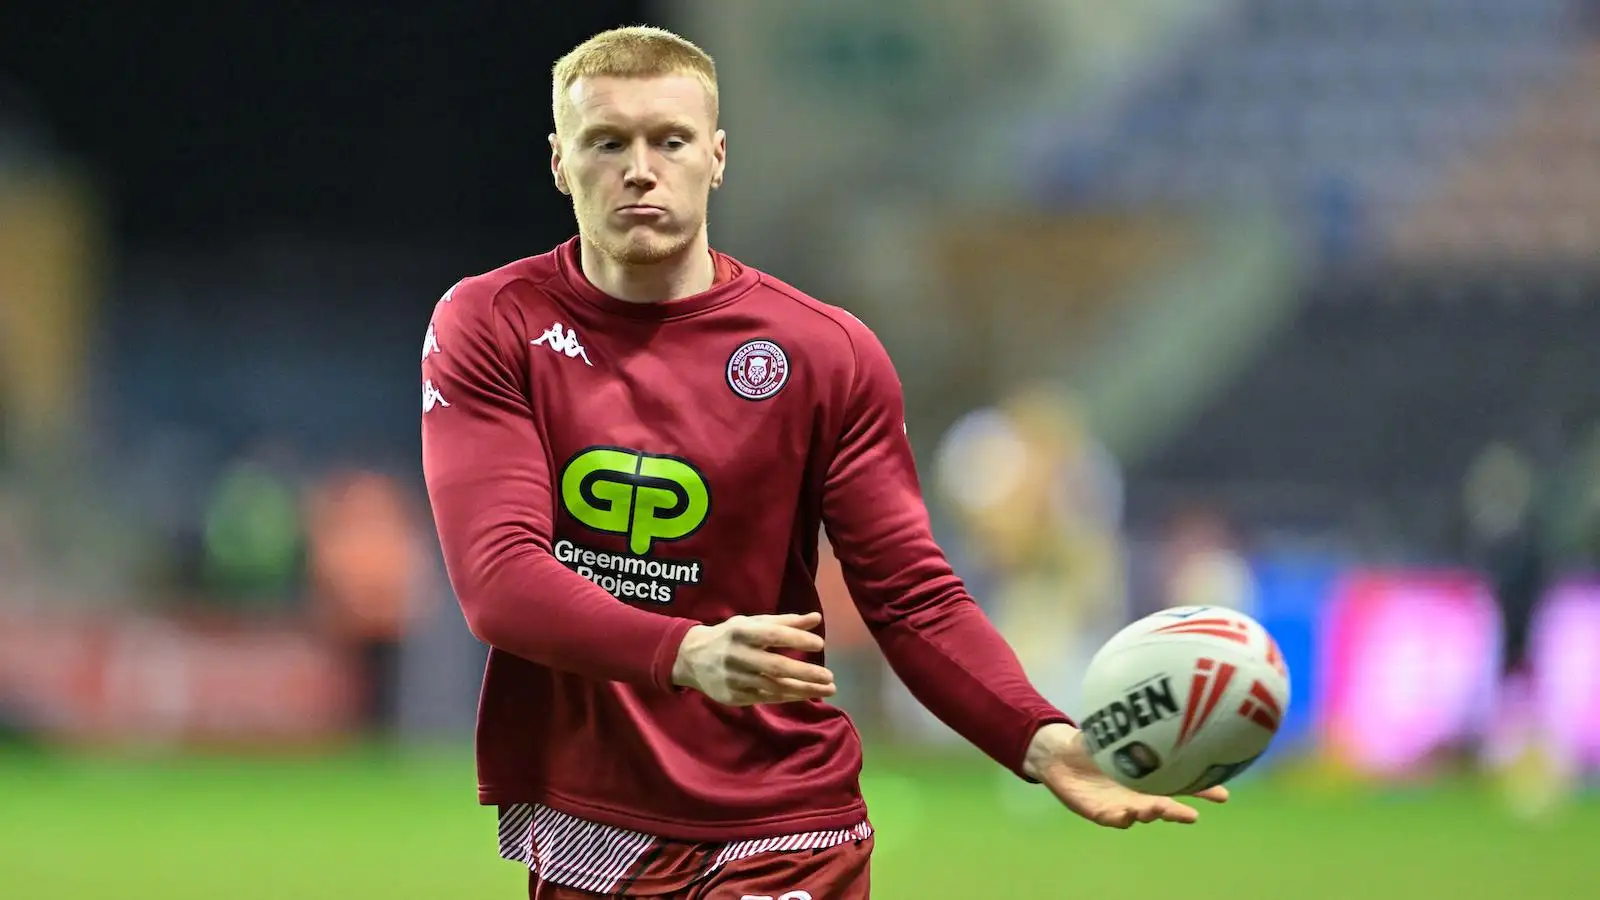 NextGen: The former sprinter who could feature for Wigan Warriors at Wembley